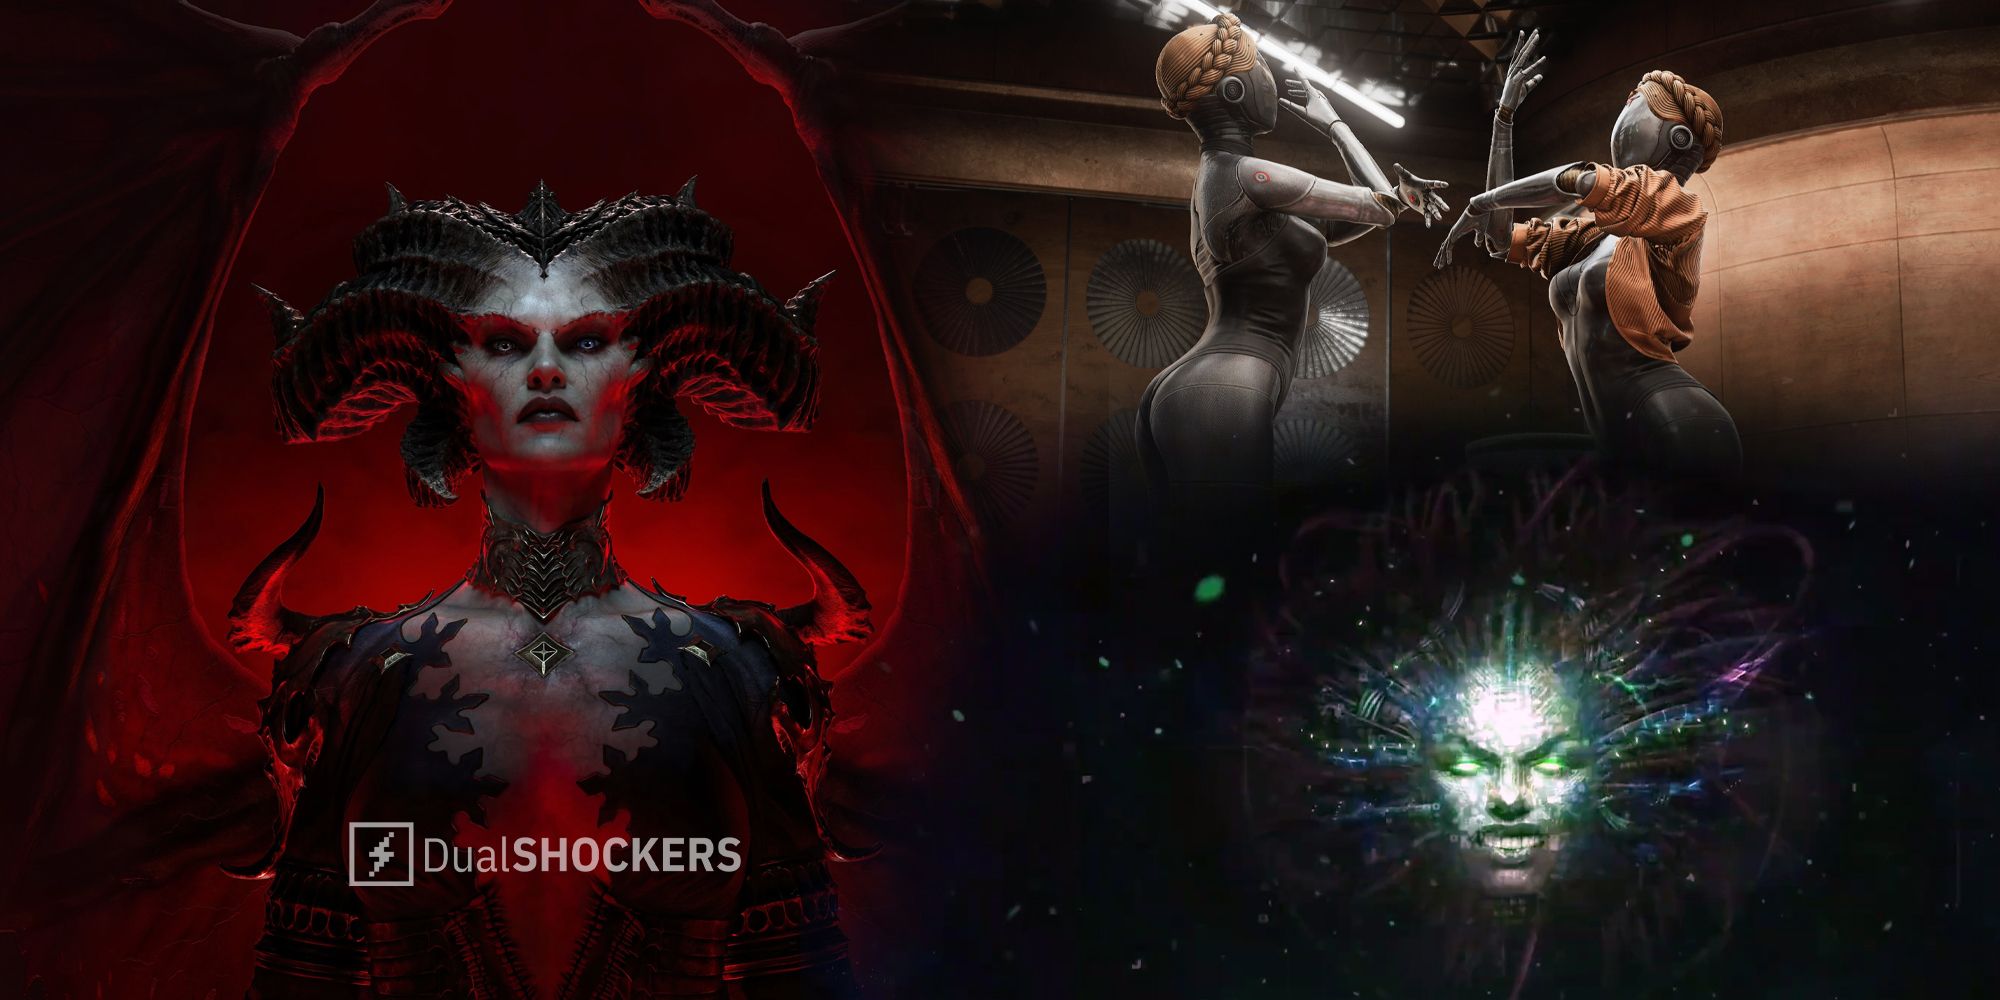 Diablo 4 Lilith, Atomic Heart Robo-twins, and System Shock SHODAN gameplay